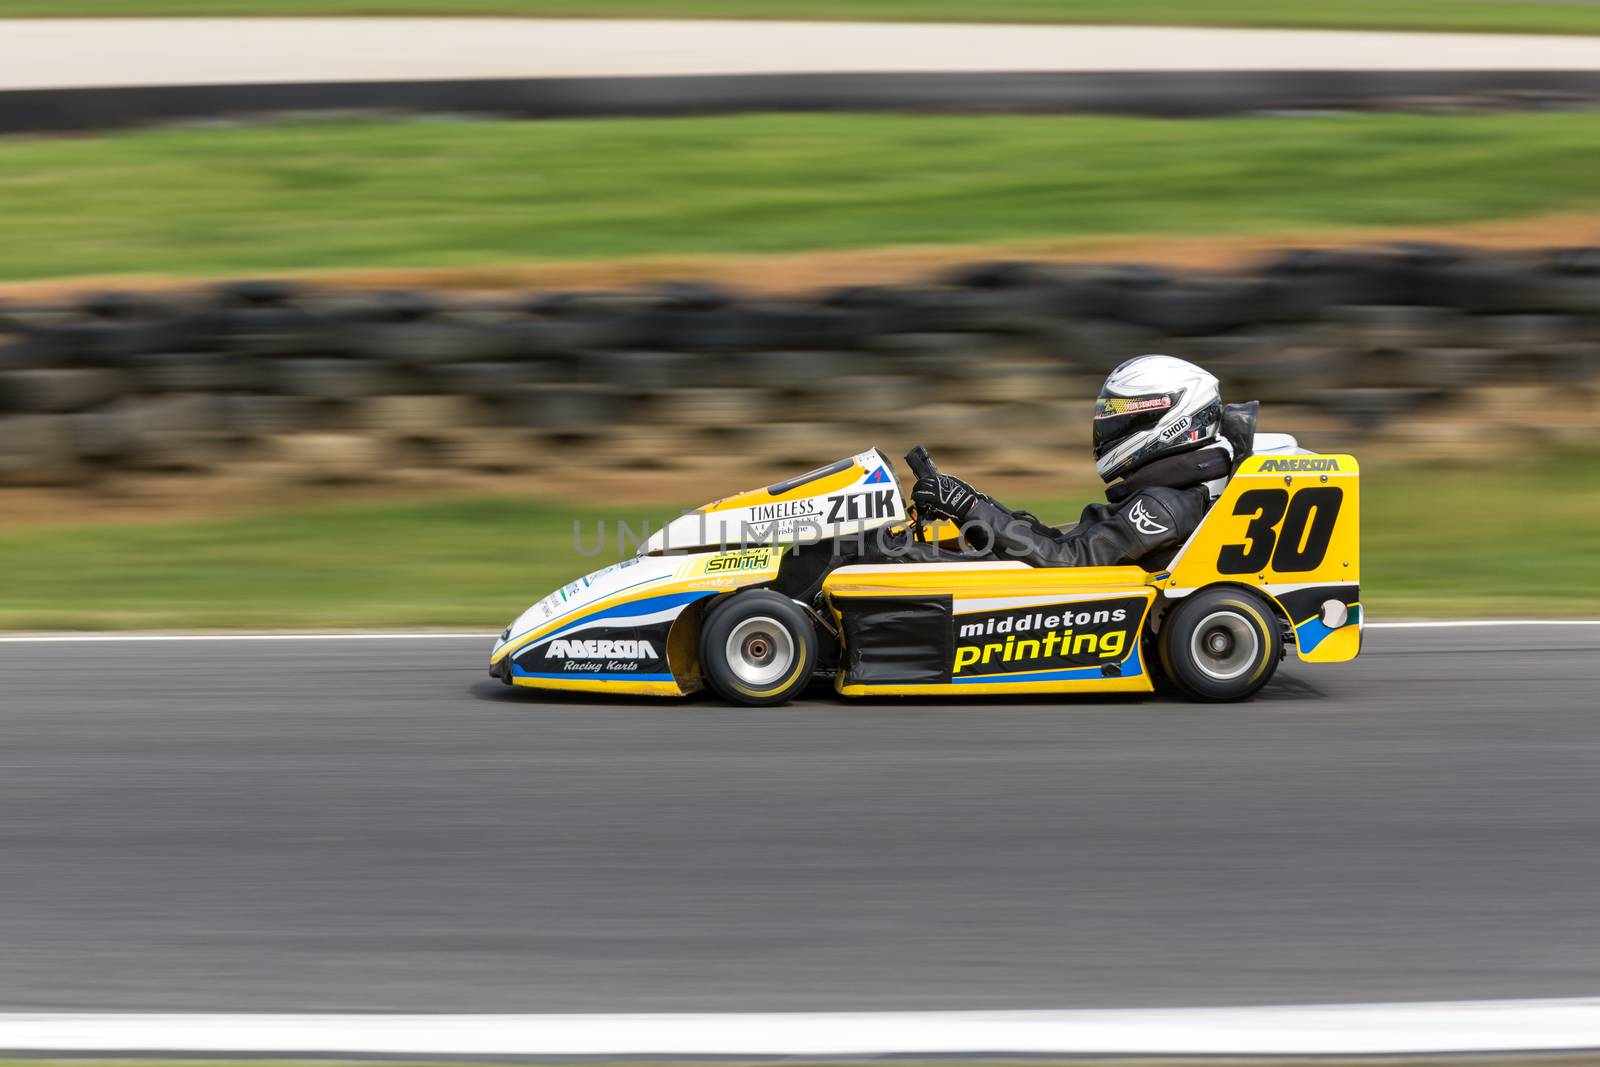 MELBOURNE/AUSTRALIA - SEPTEMBER 10, 2016: Jason Smith behind the wheel of the Middletons Printing/TJP Motorsport SuperKart for qualifying at Round 6 of the Shannon's Nationals at Phillip Island GP Track in Victoria, Australia 9-11 September.